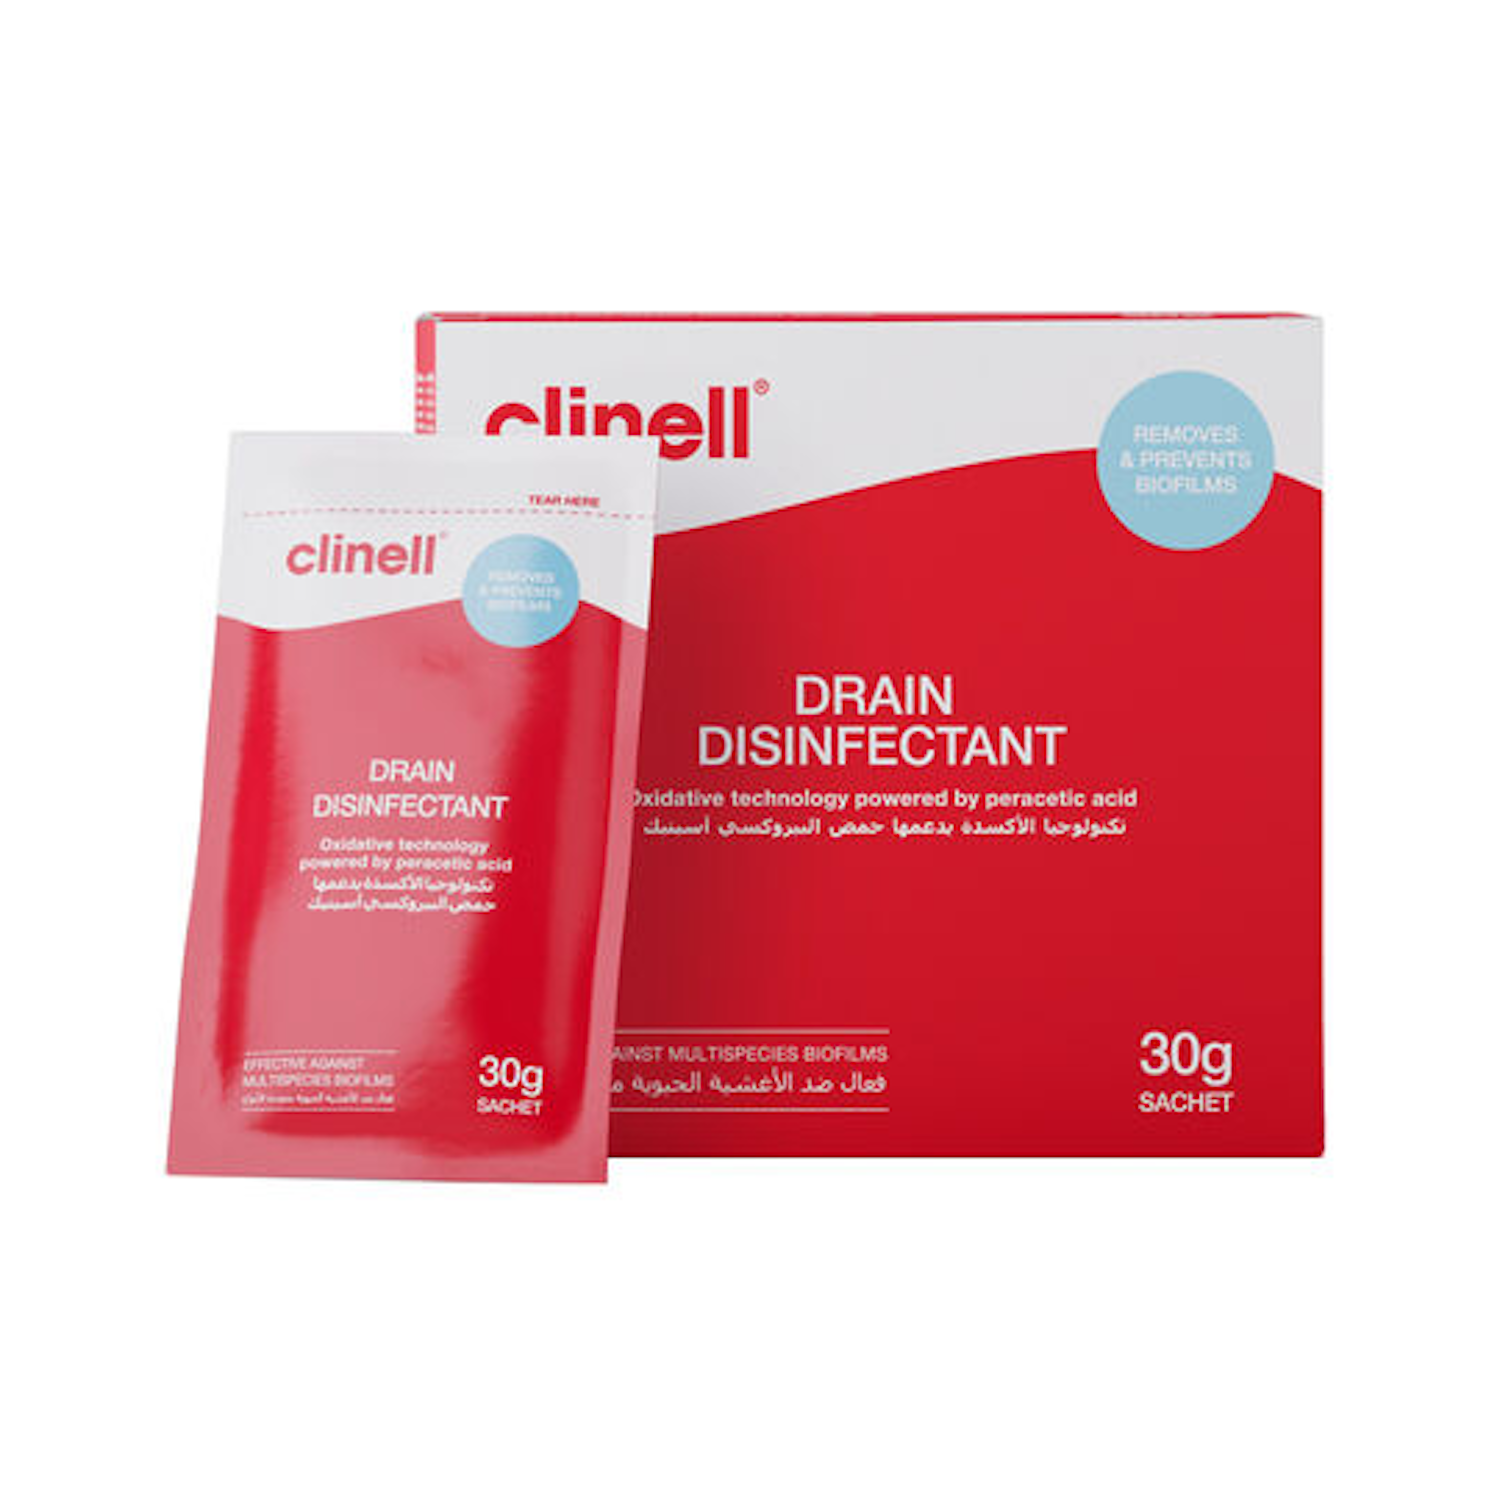 Clinell Drain Disinfectant Sachets | 30g | Pack of 24